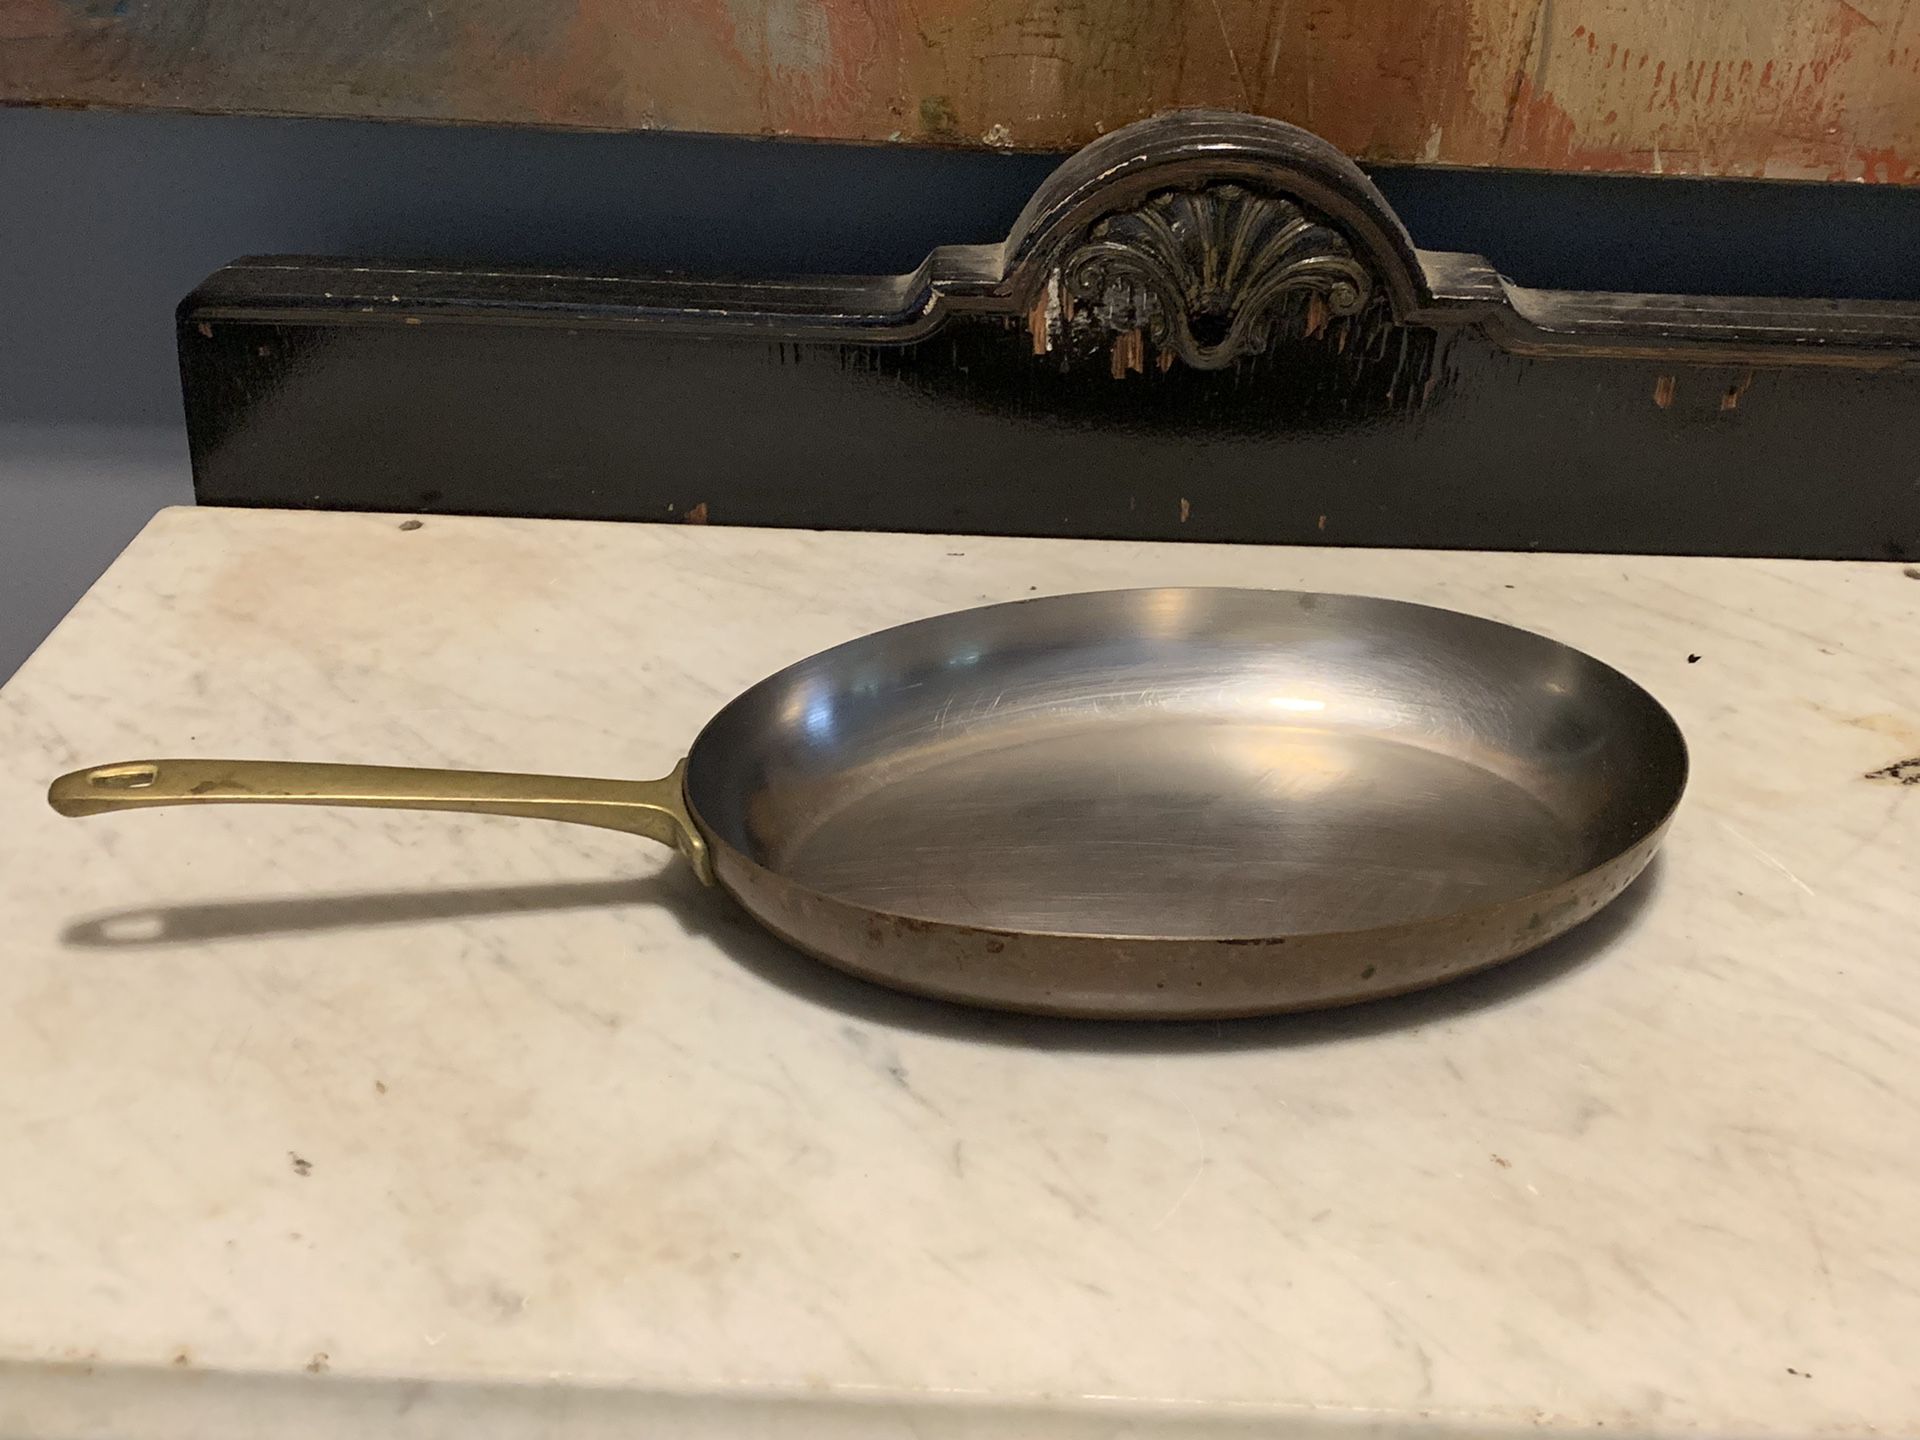 Paul revere limited edition copper oval pan